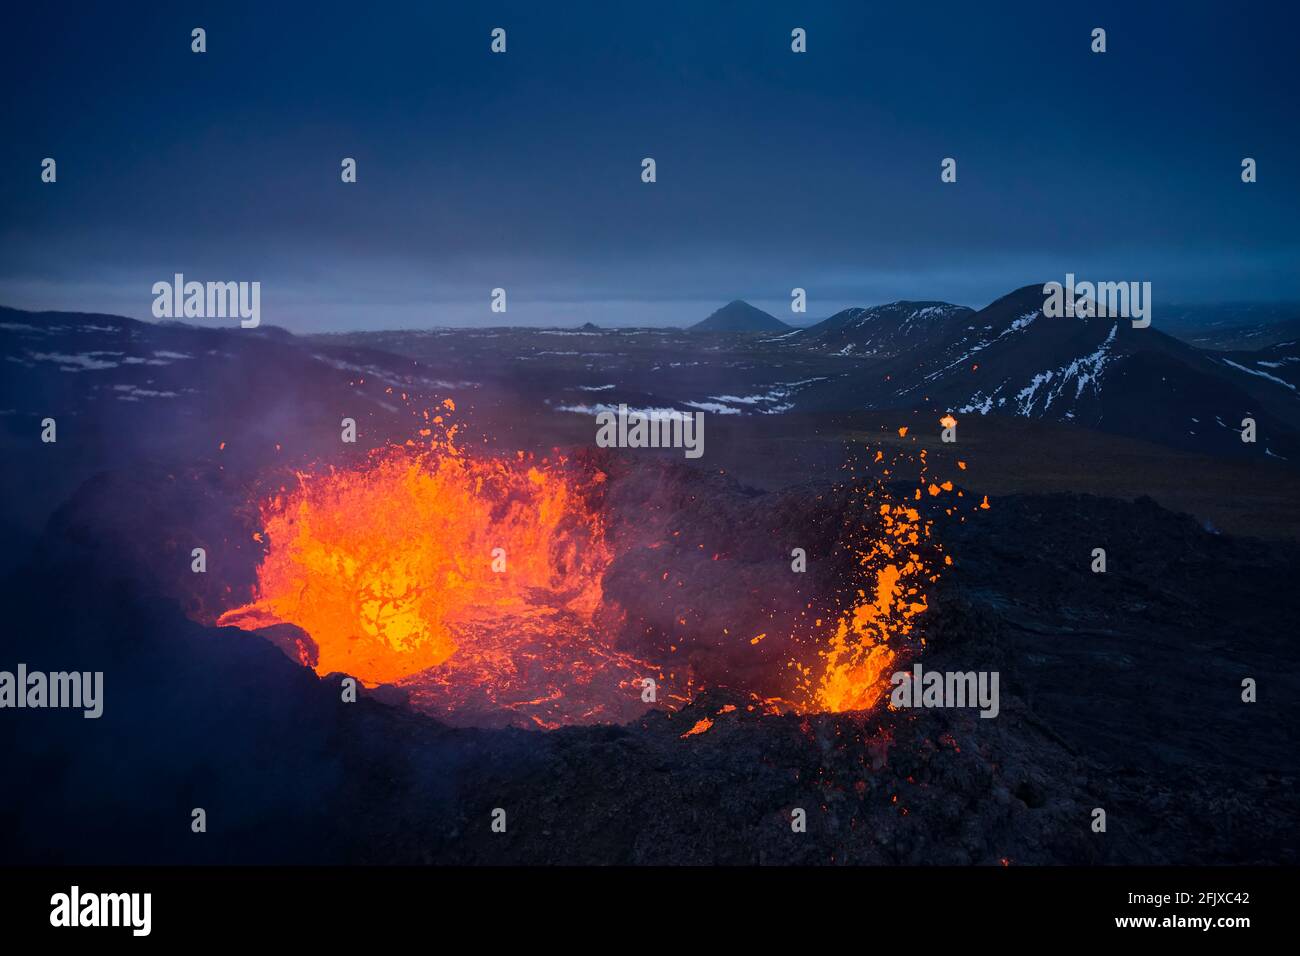 Volcanic terrain with burning hot lava in evening Stock Photo